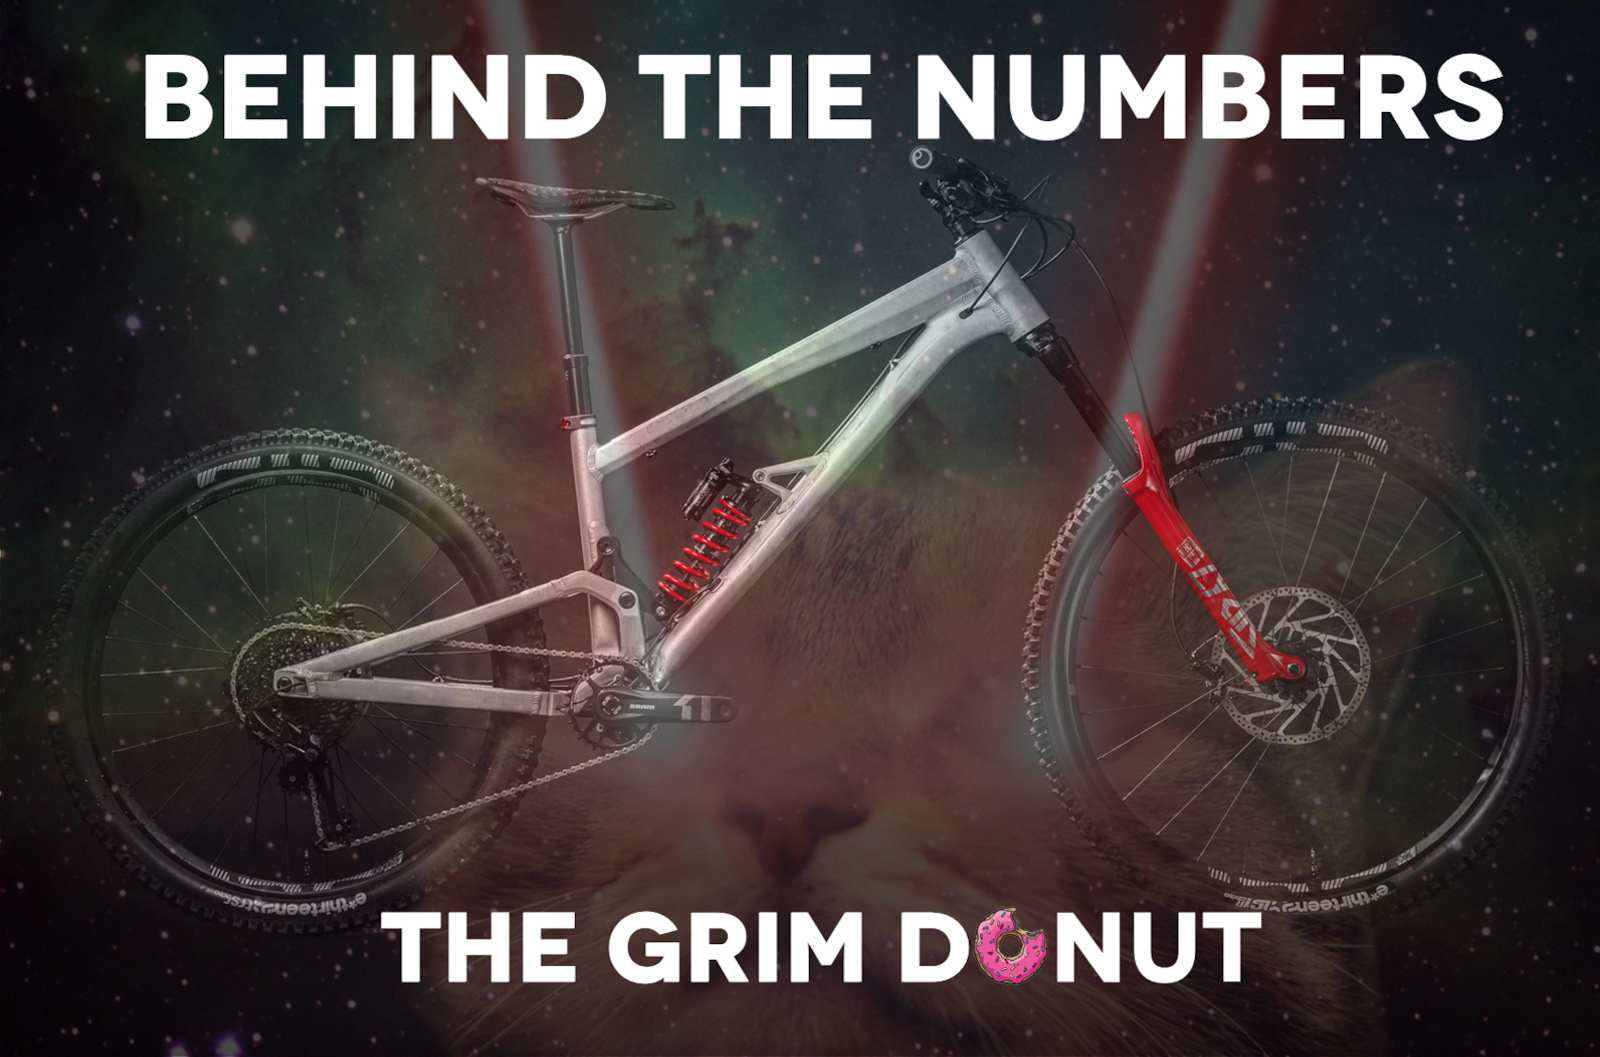 Having a go at Pink bike's Grim Donut Game 